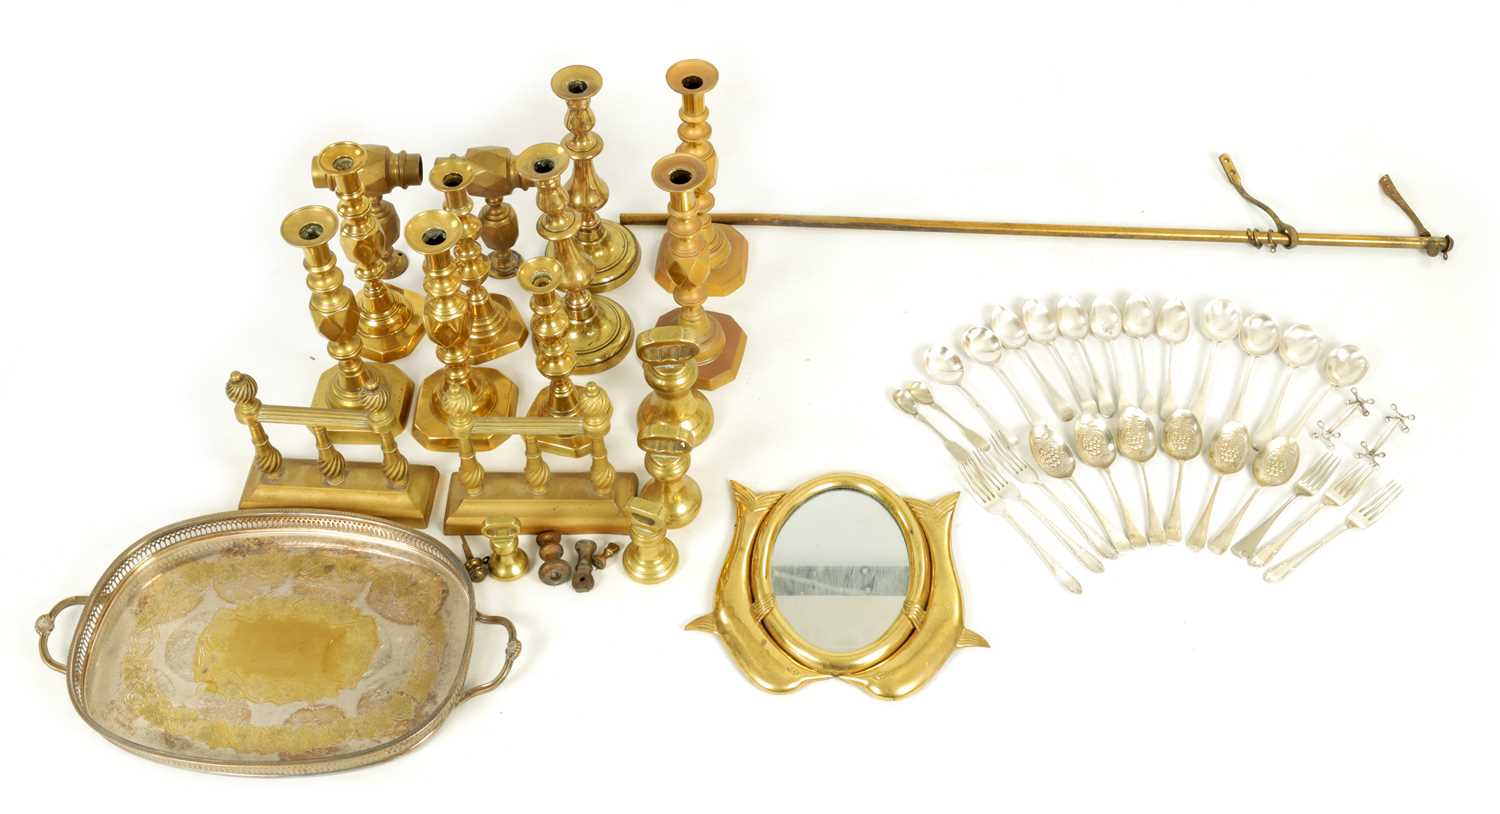 Lot 537 - A LARGE QUANTITY OF LATE 19TH CENTURY BRASS AND COPPER ITEMS